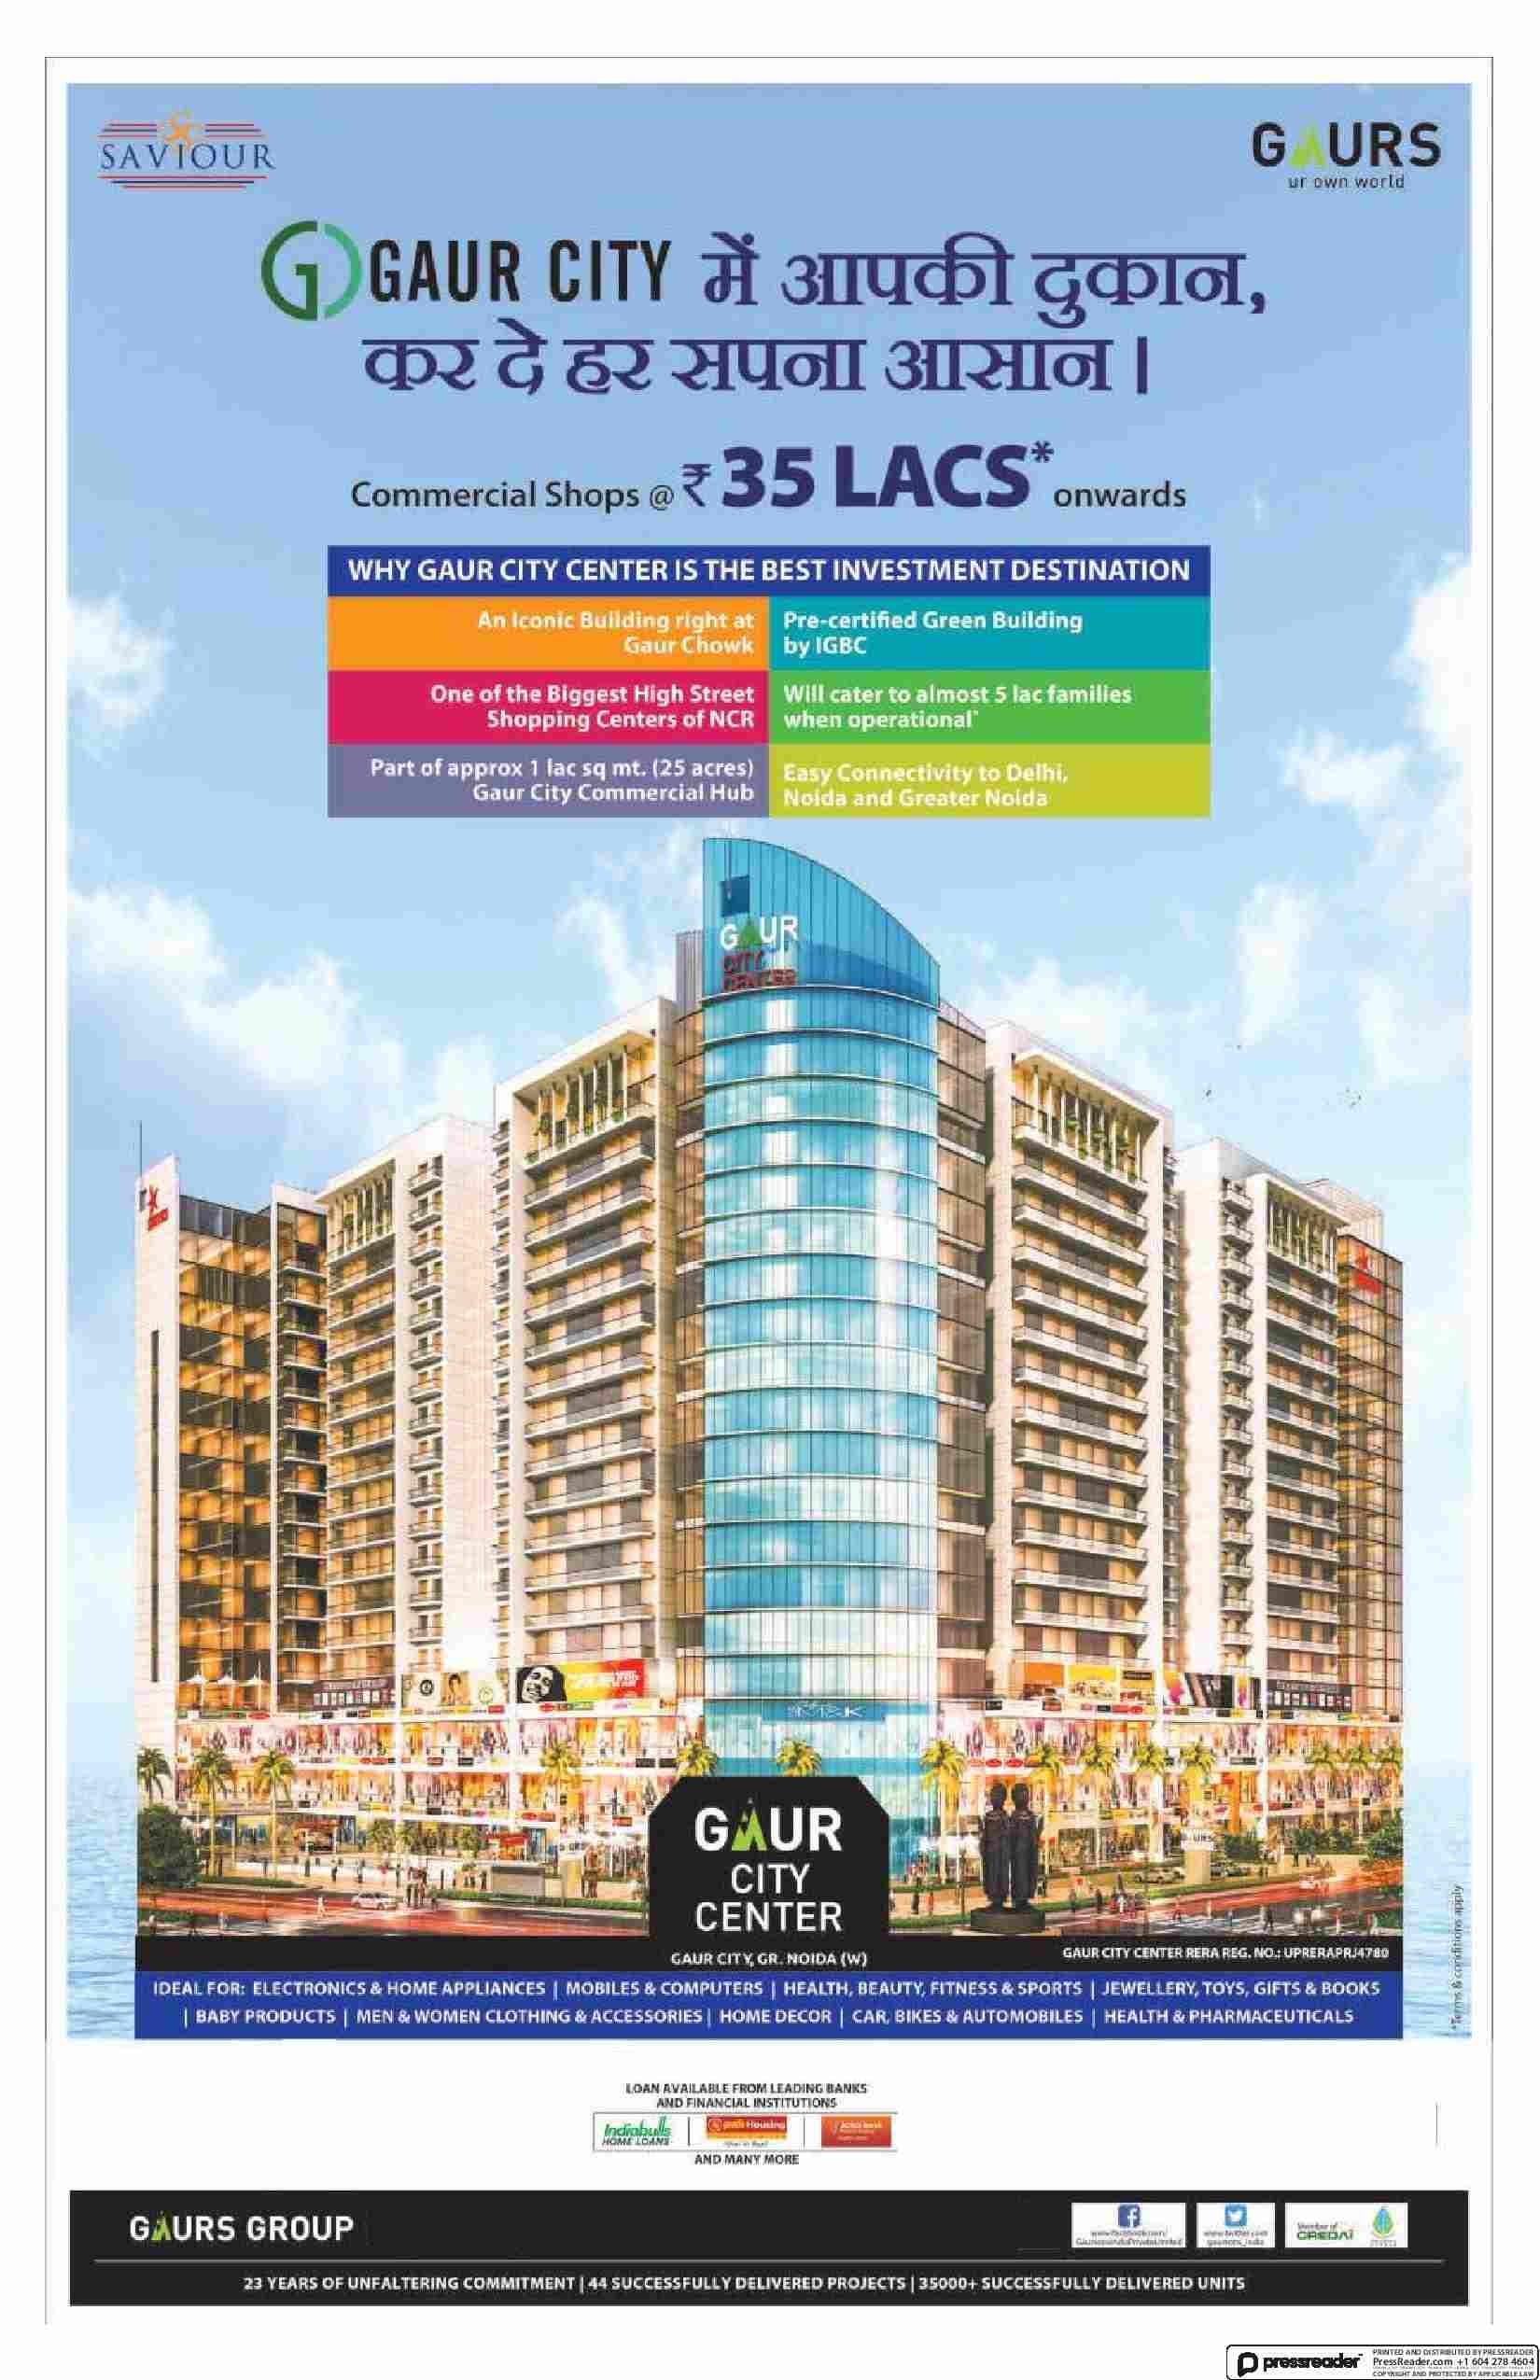 Book commercial shops @ Rs. 35 Lacs onwards at Gaur City Center in Greater Noida